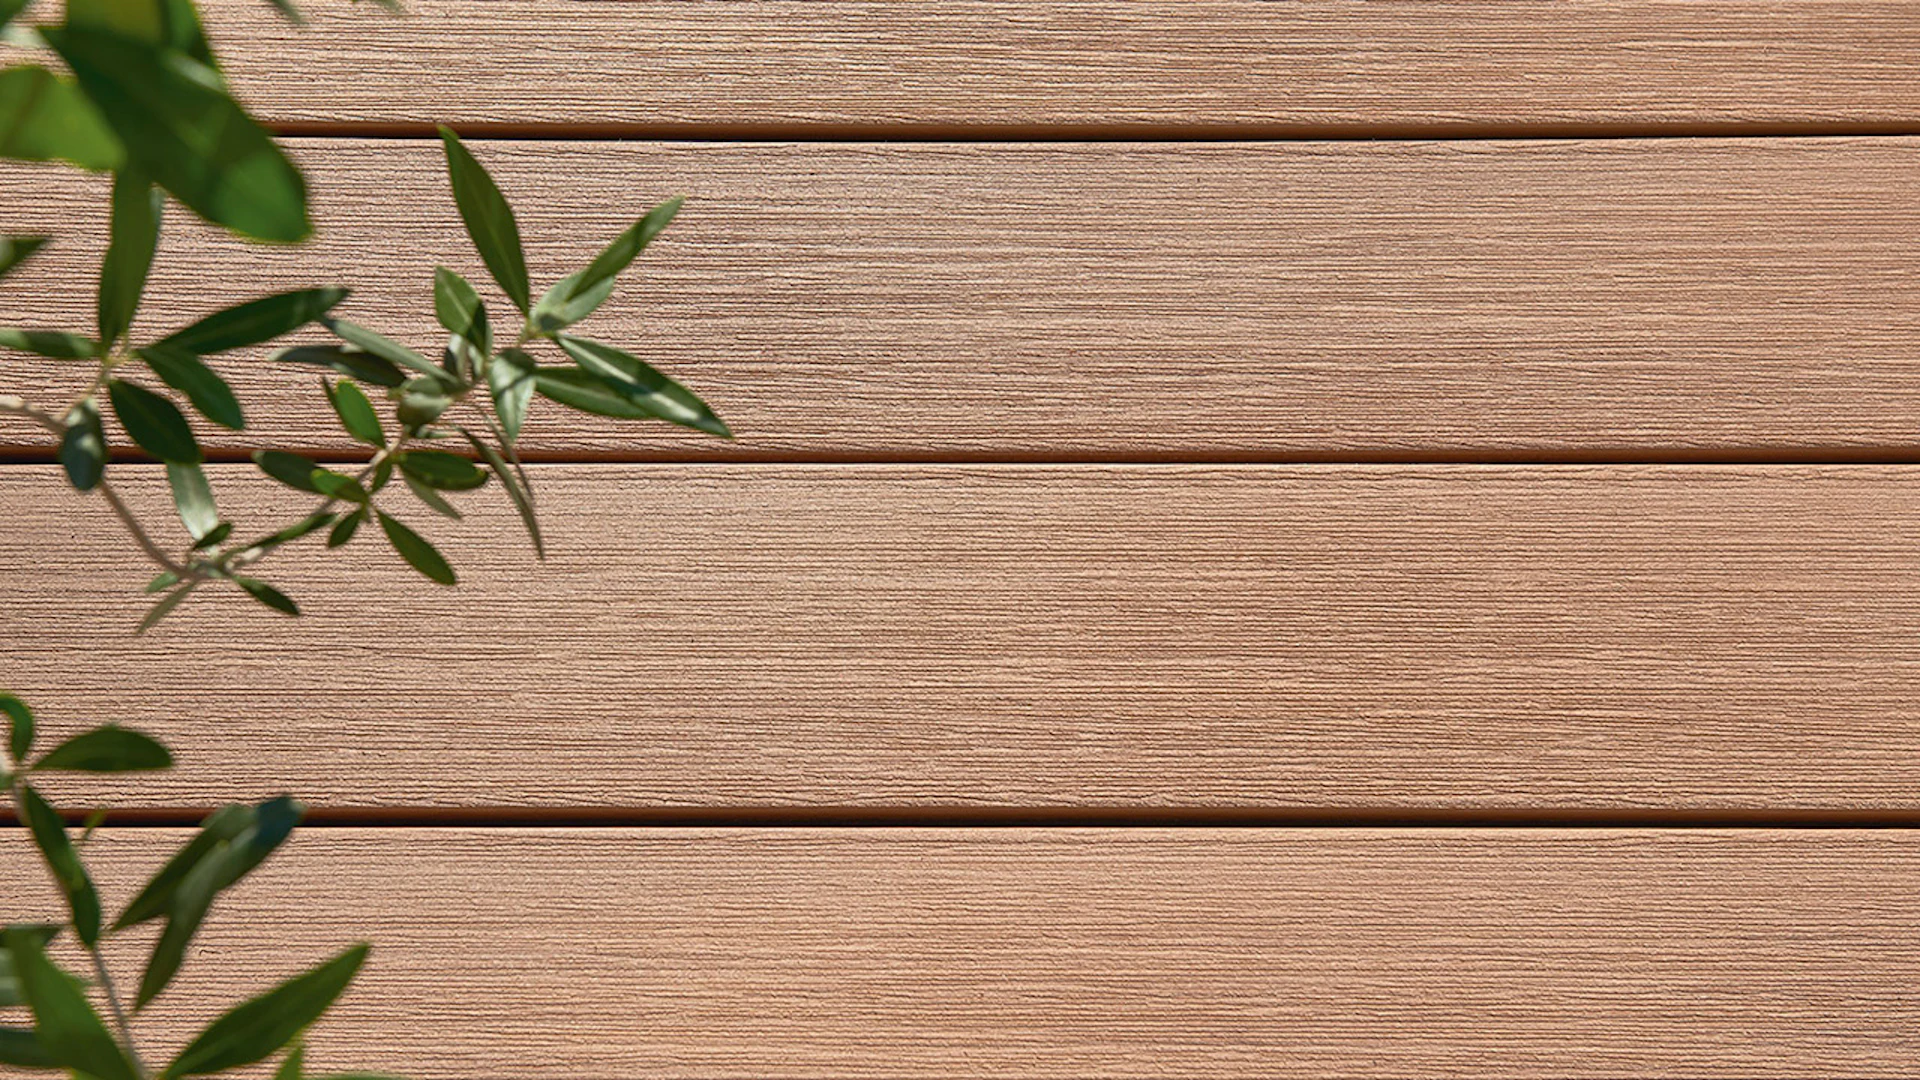 planeo WPC decking boards - Stabilo sand structured brushed